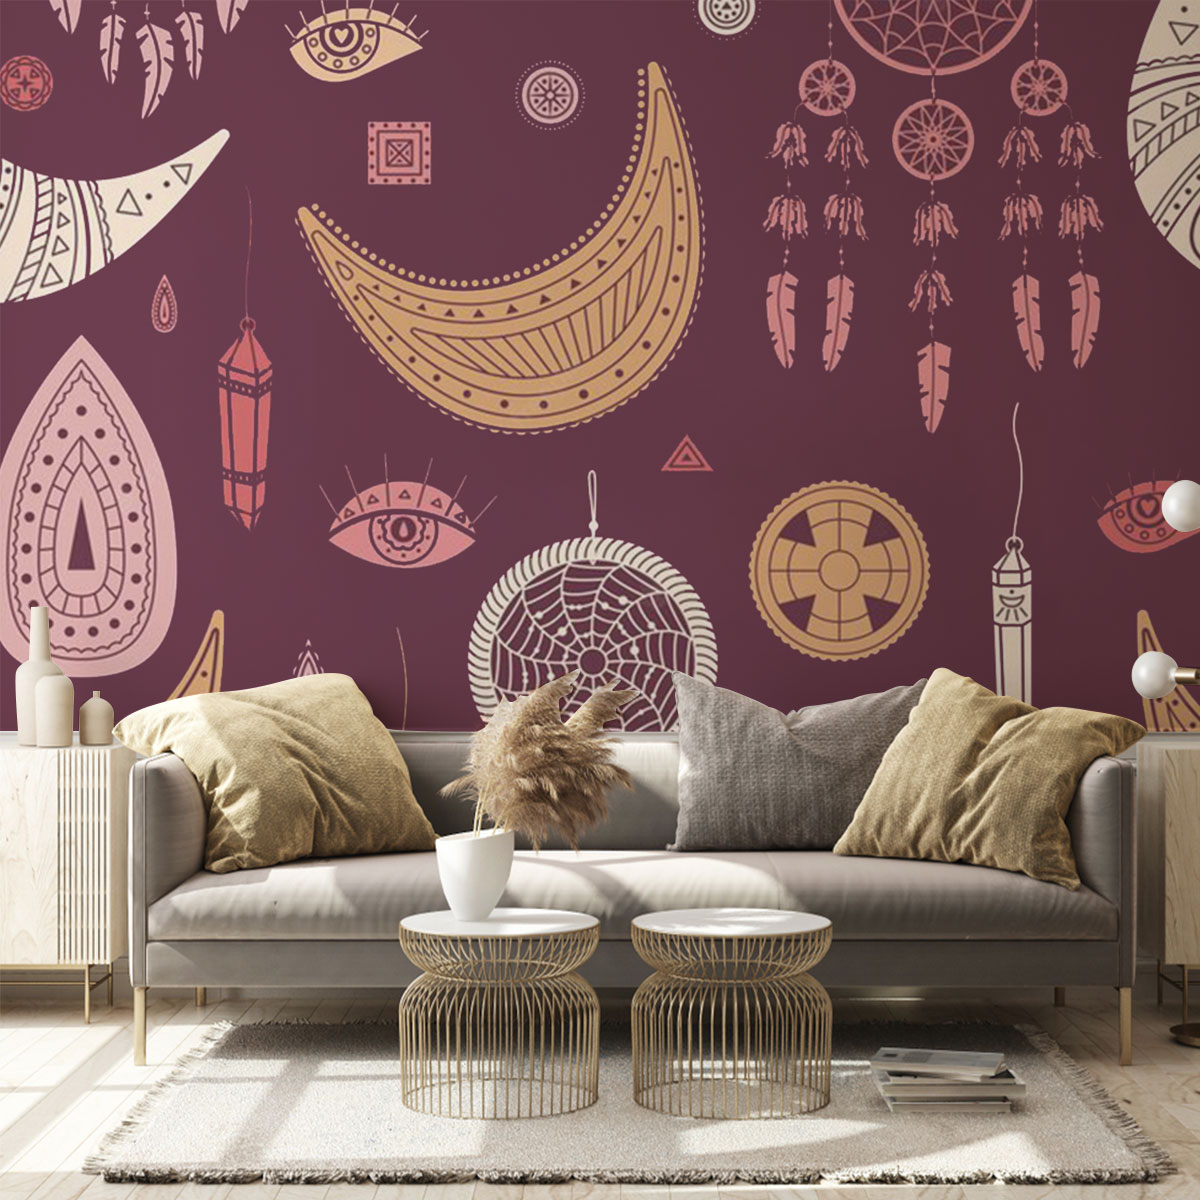 Bohemian With Dreamcatcher And Moon Wall Mural